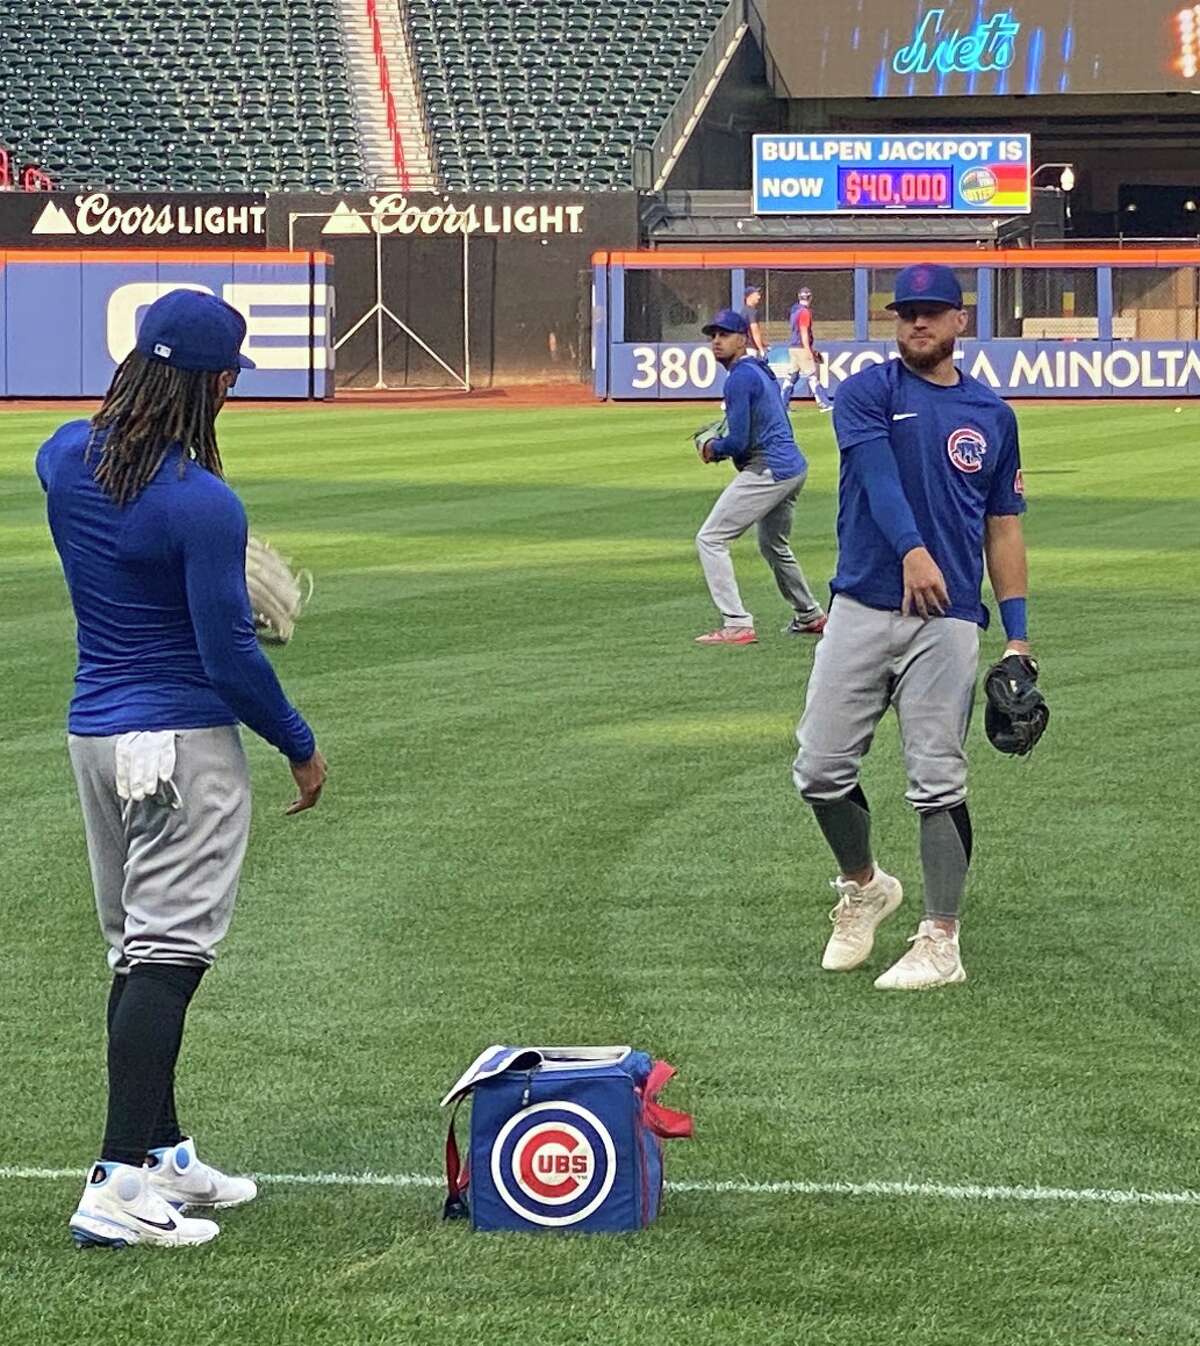 Wallingford's P.J. Higgins (right) plays catch with a Chicago Cubs teammate prior to a game against the Mets on Monday night at Citi Field.